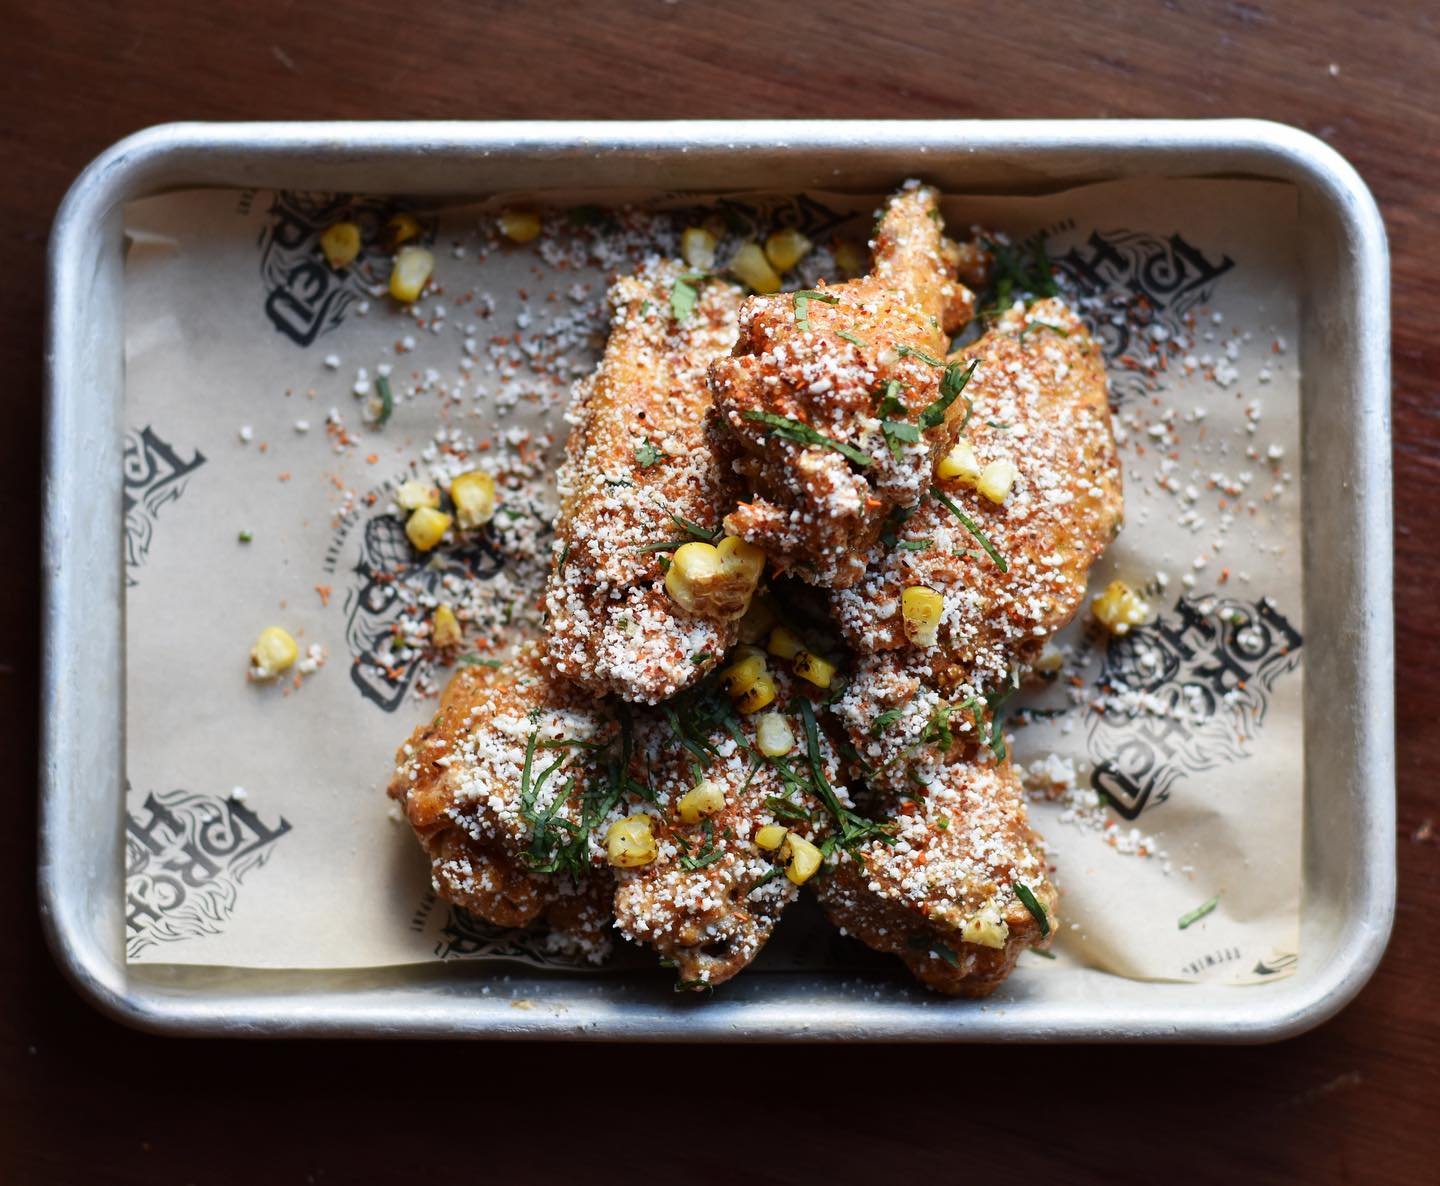 Wing Wednesday + Cinco de Mayo = Elote Wings 

These wings are tossed in our house Elote Sauce then topped with Adobo and Tajin, Roasted Corn, Cotija Cheese, and Cilantro. 

6 Wings + Fries + Beer = $13
10 Wings + Beer = $14